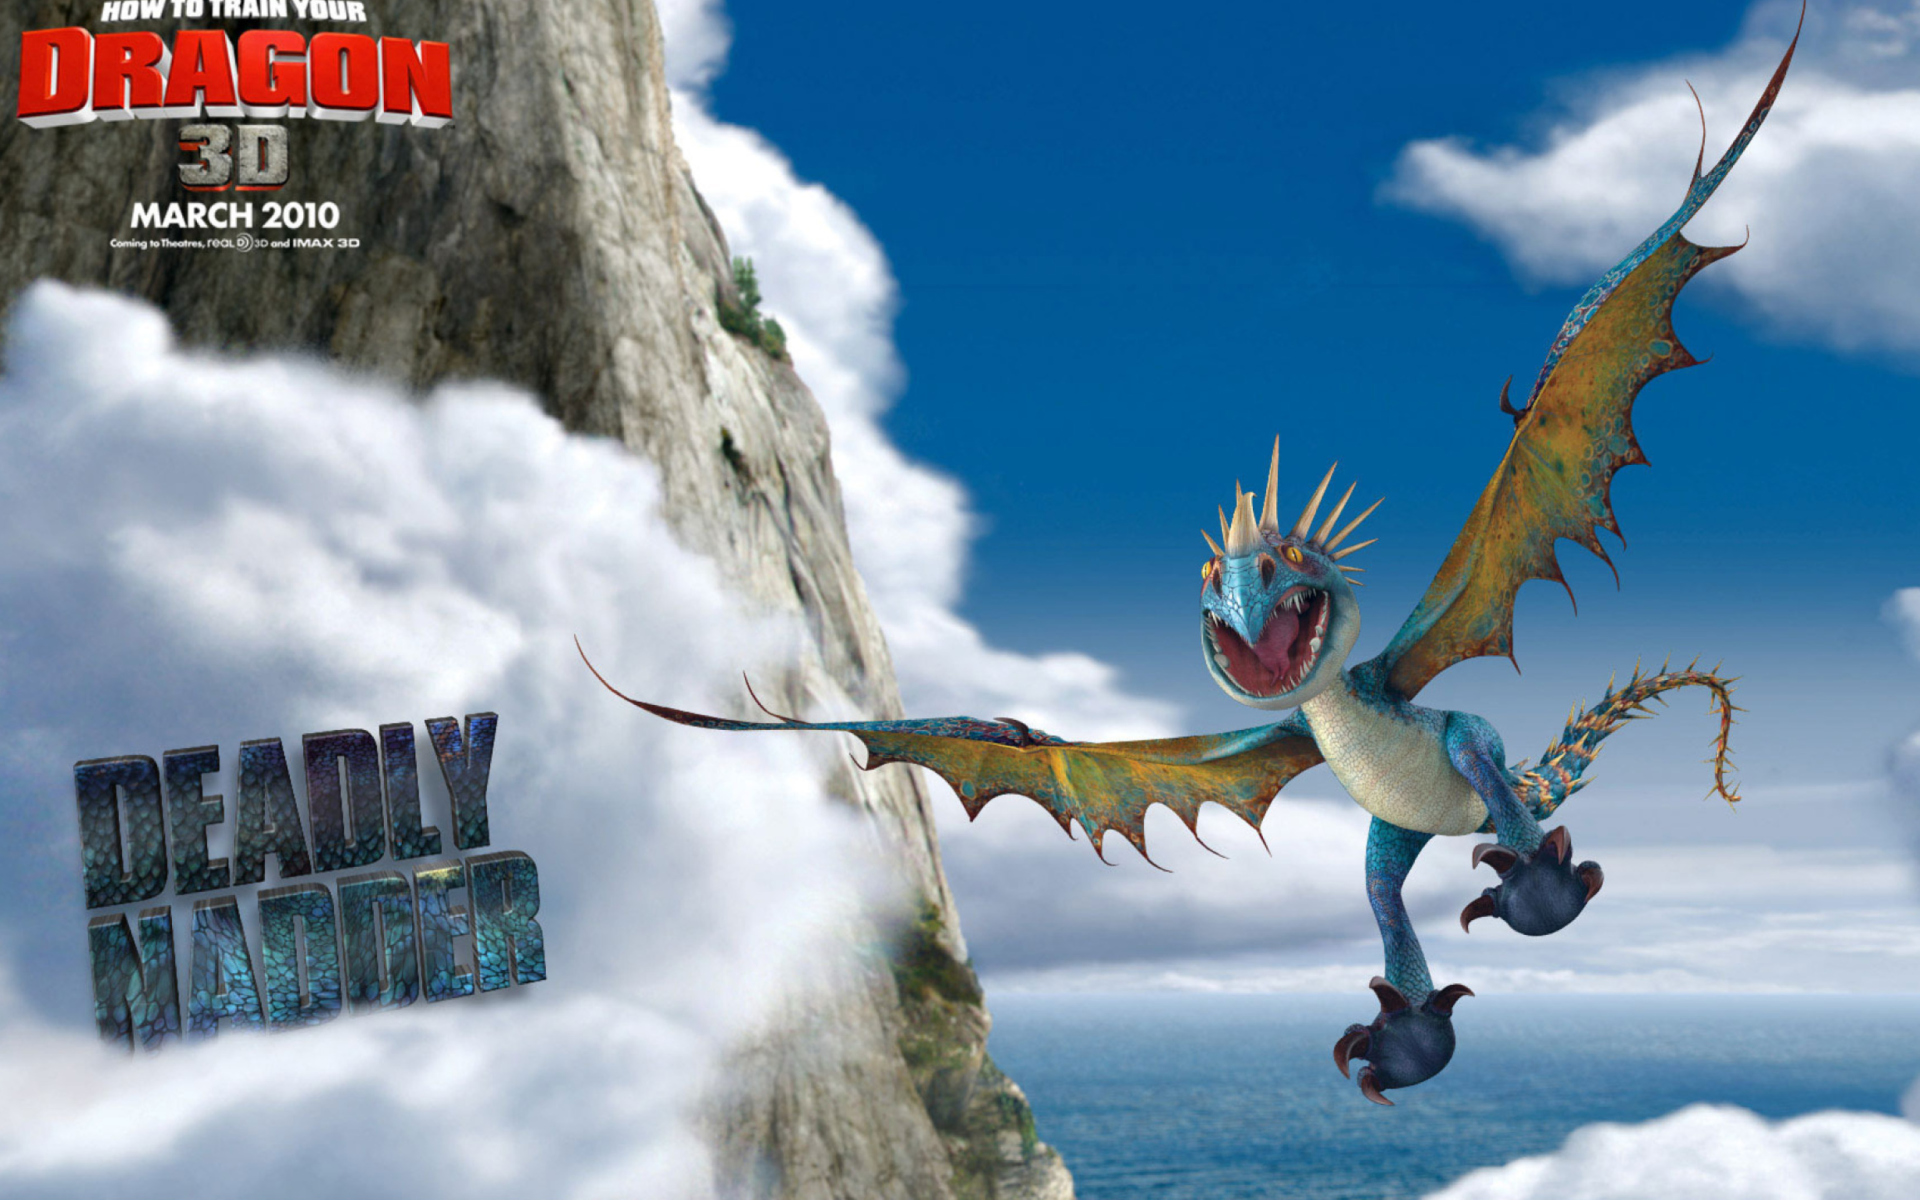 How to Train Your Dragon wallpaper 1920x1200